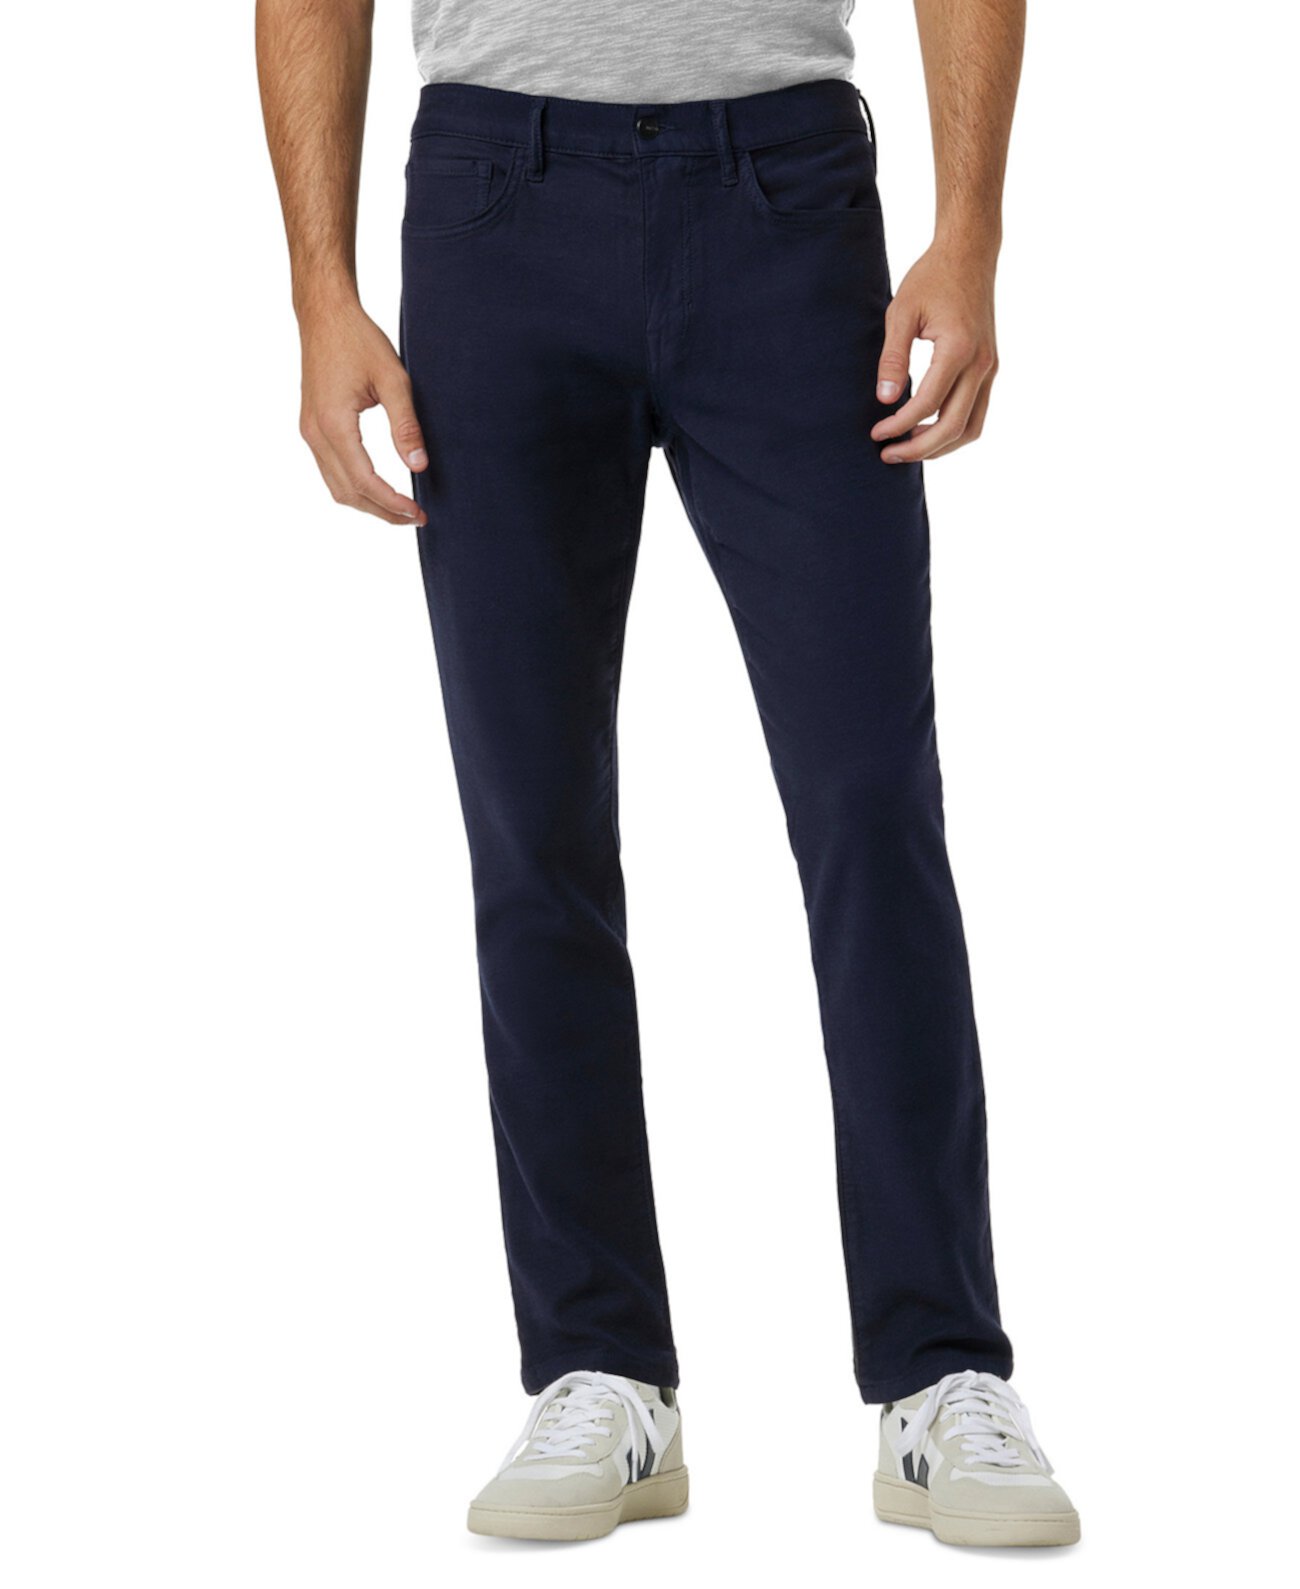 Men's Slim-Fit Asher Airsoft Jeans Joe's Jeans